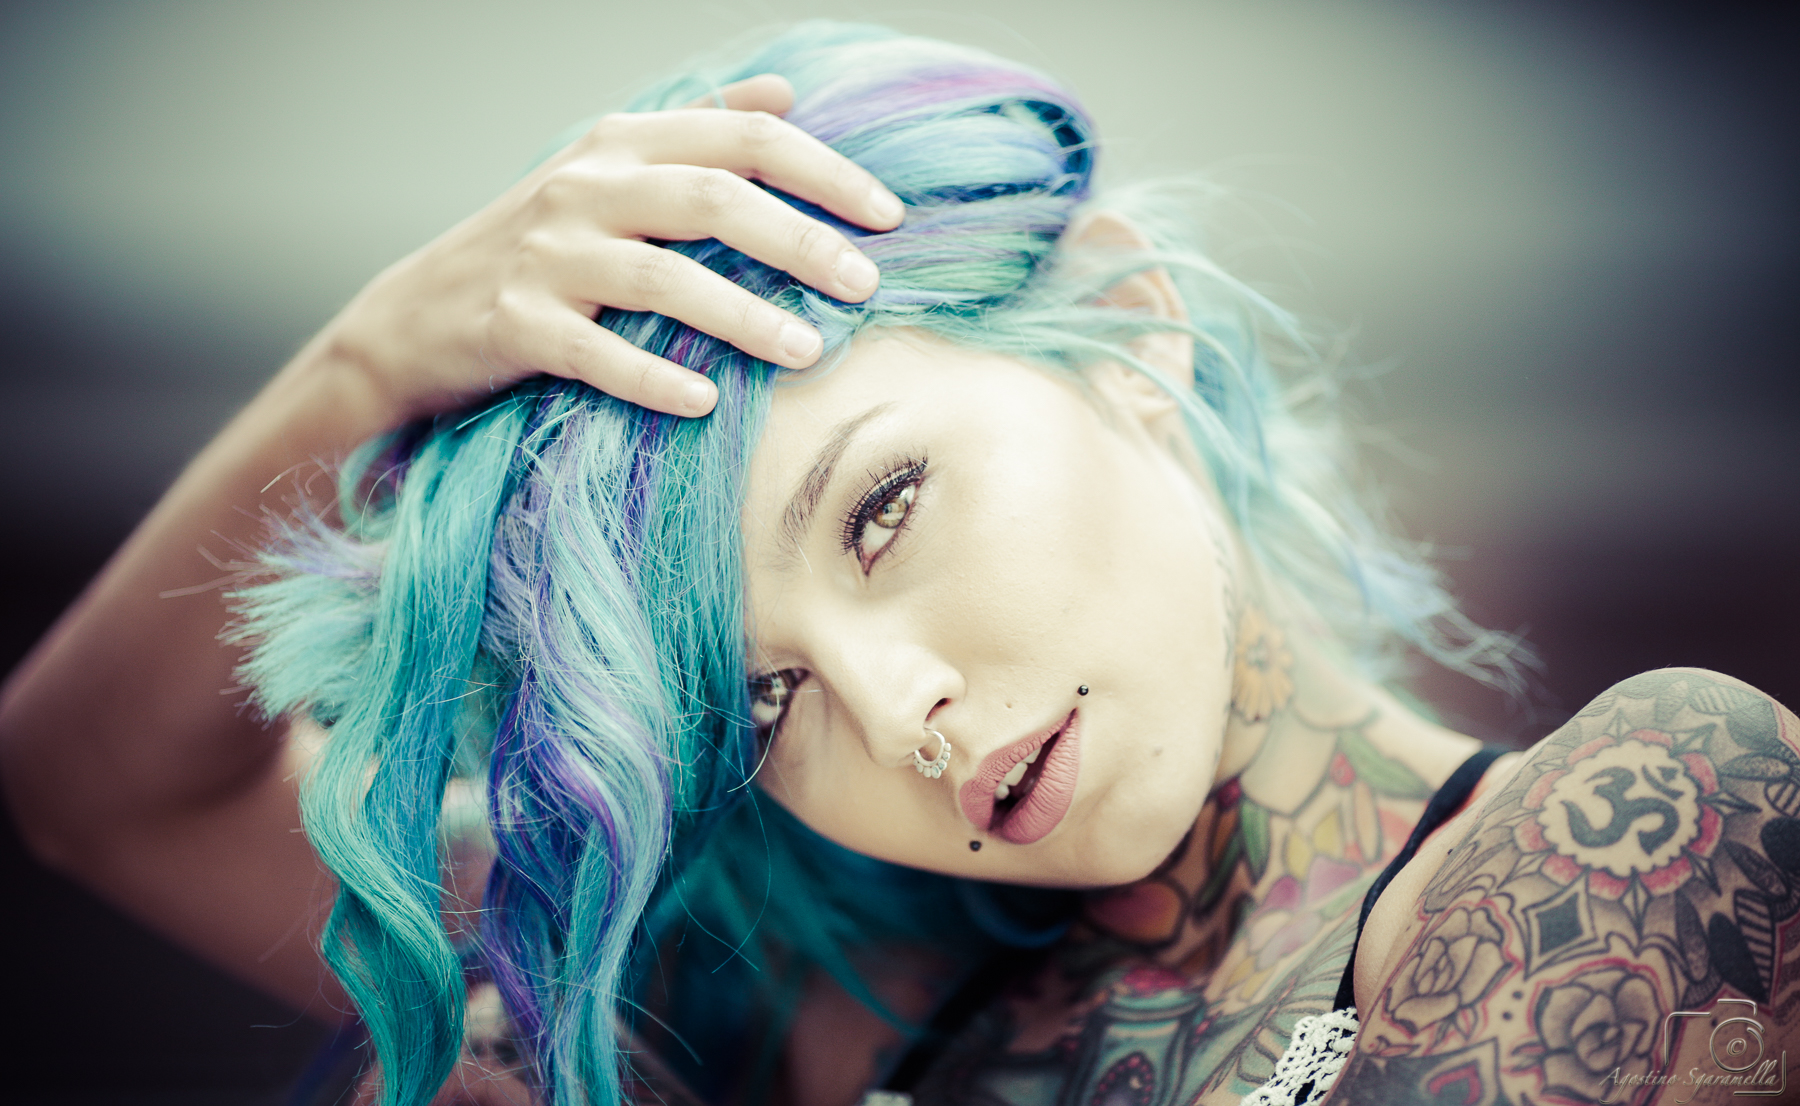 Fely Suicide...